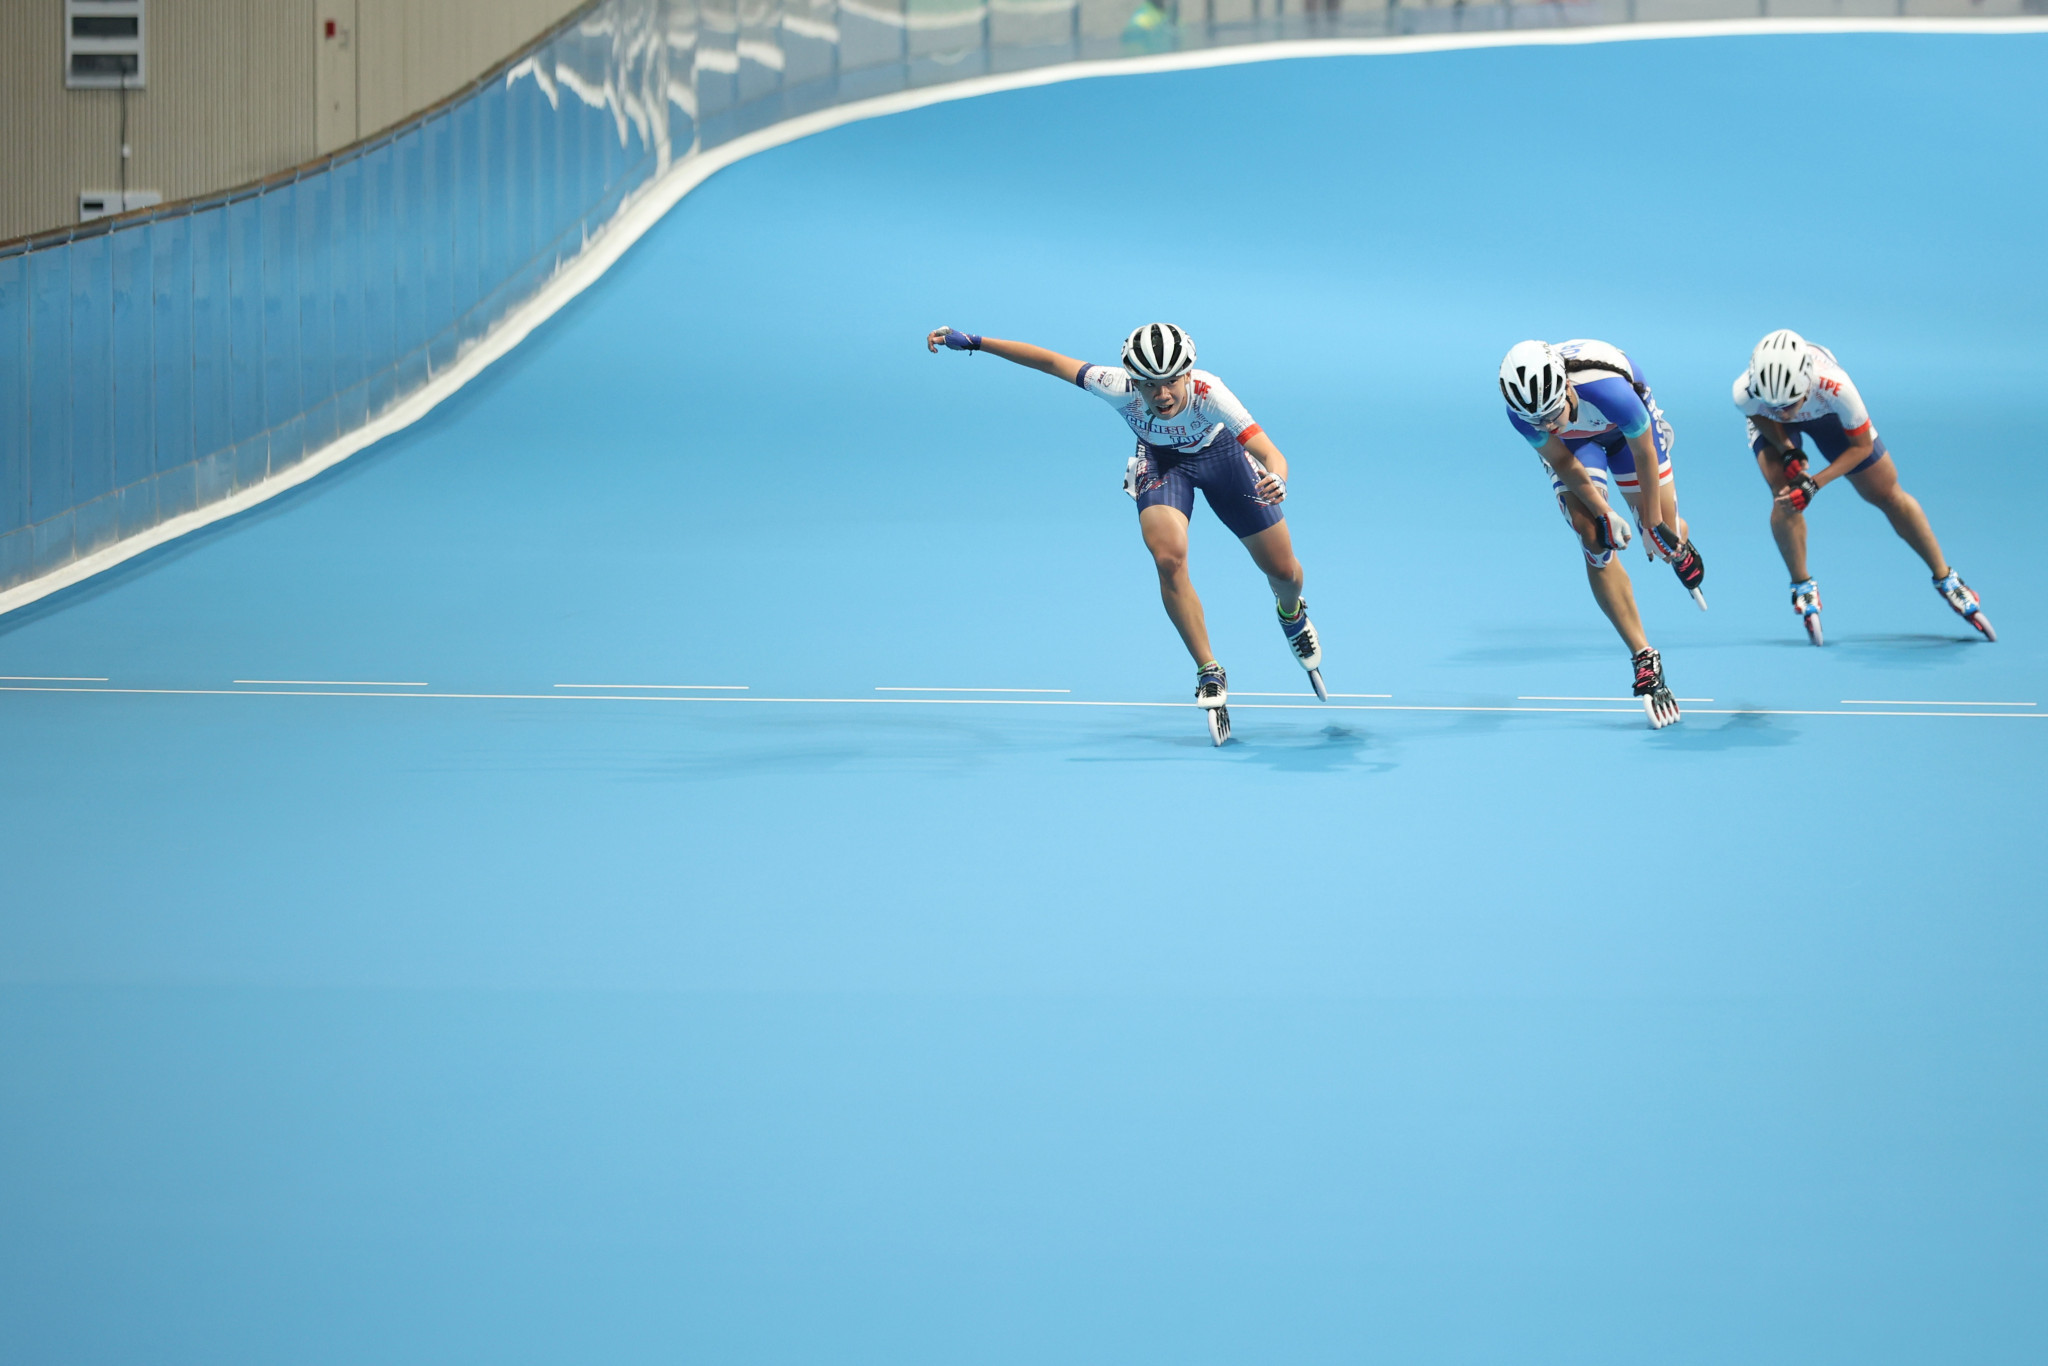 Chinese Taipei's Shih Pei-yu, left, clinched the first roller skating title of the Games in the women's speed skating 10,000m point-elimination race ©Hangzhou 2022